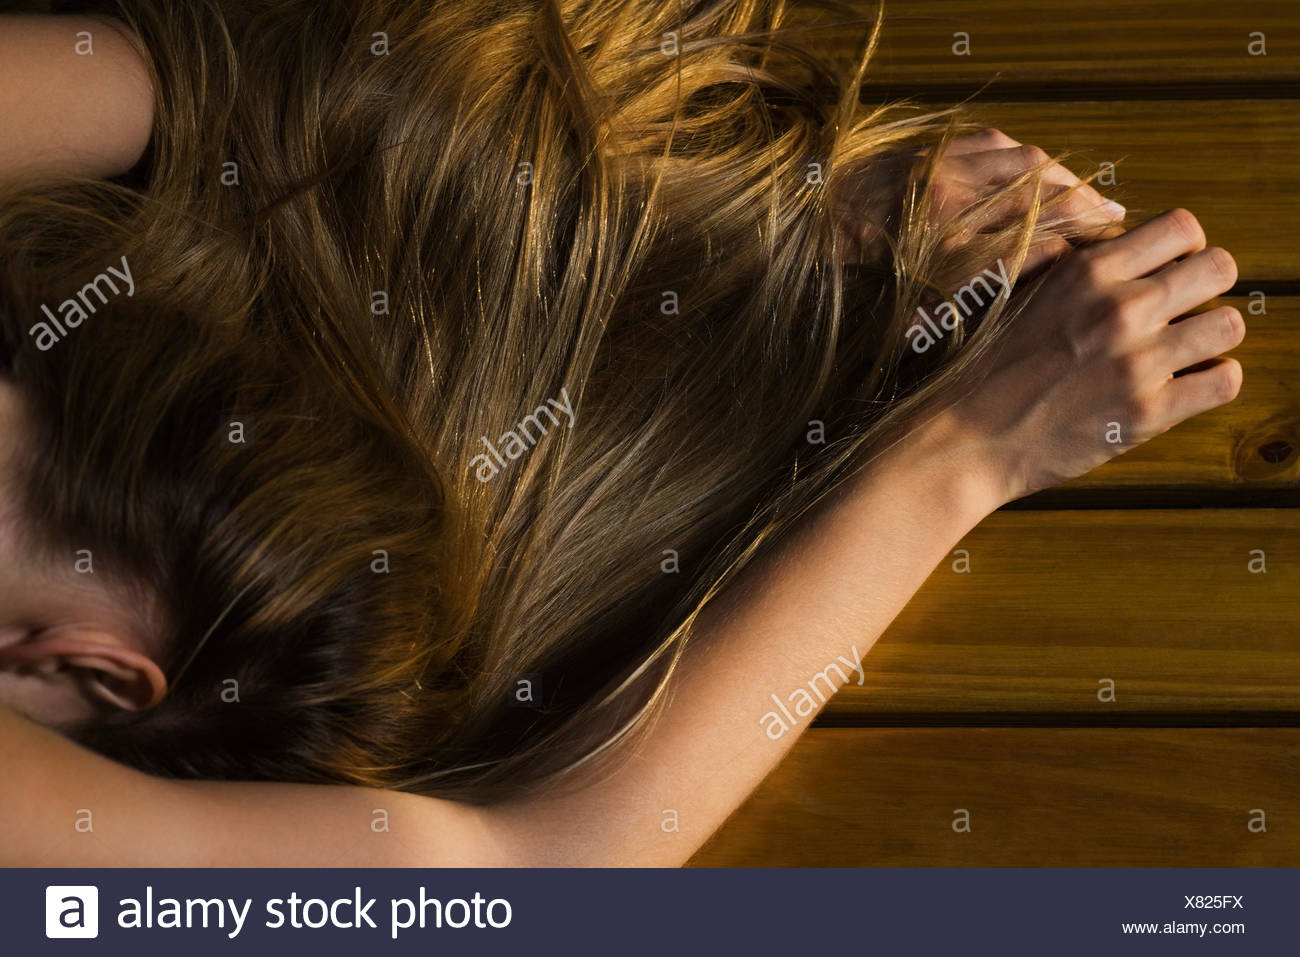 Woman Lying Face Down On Floor Long Hair Covering Arm Cropped